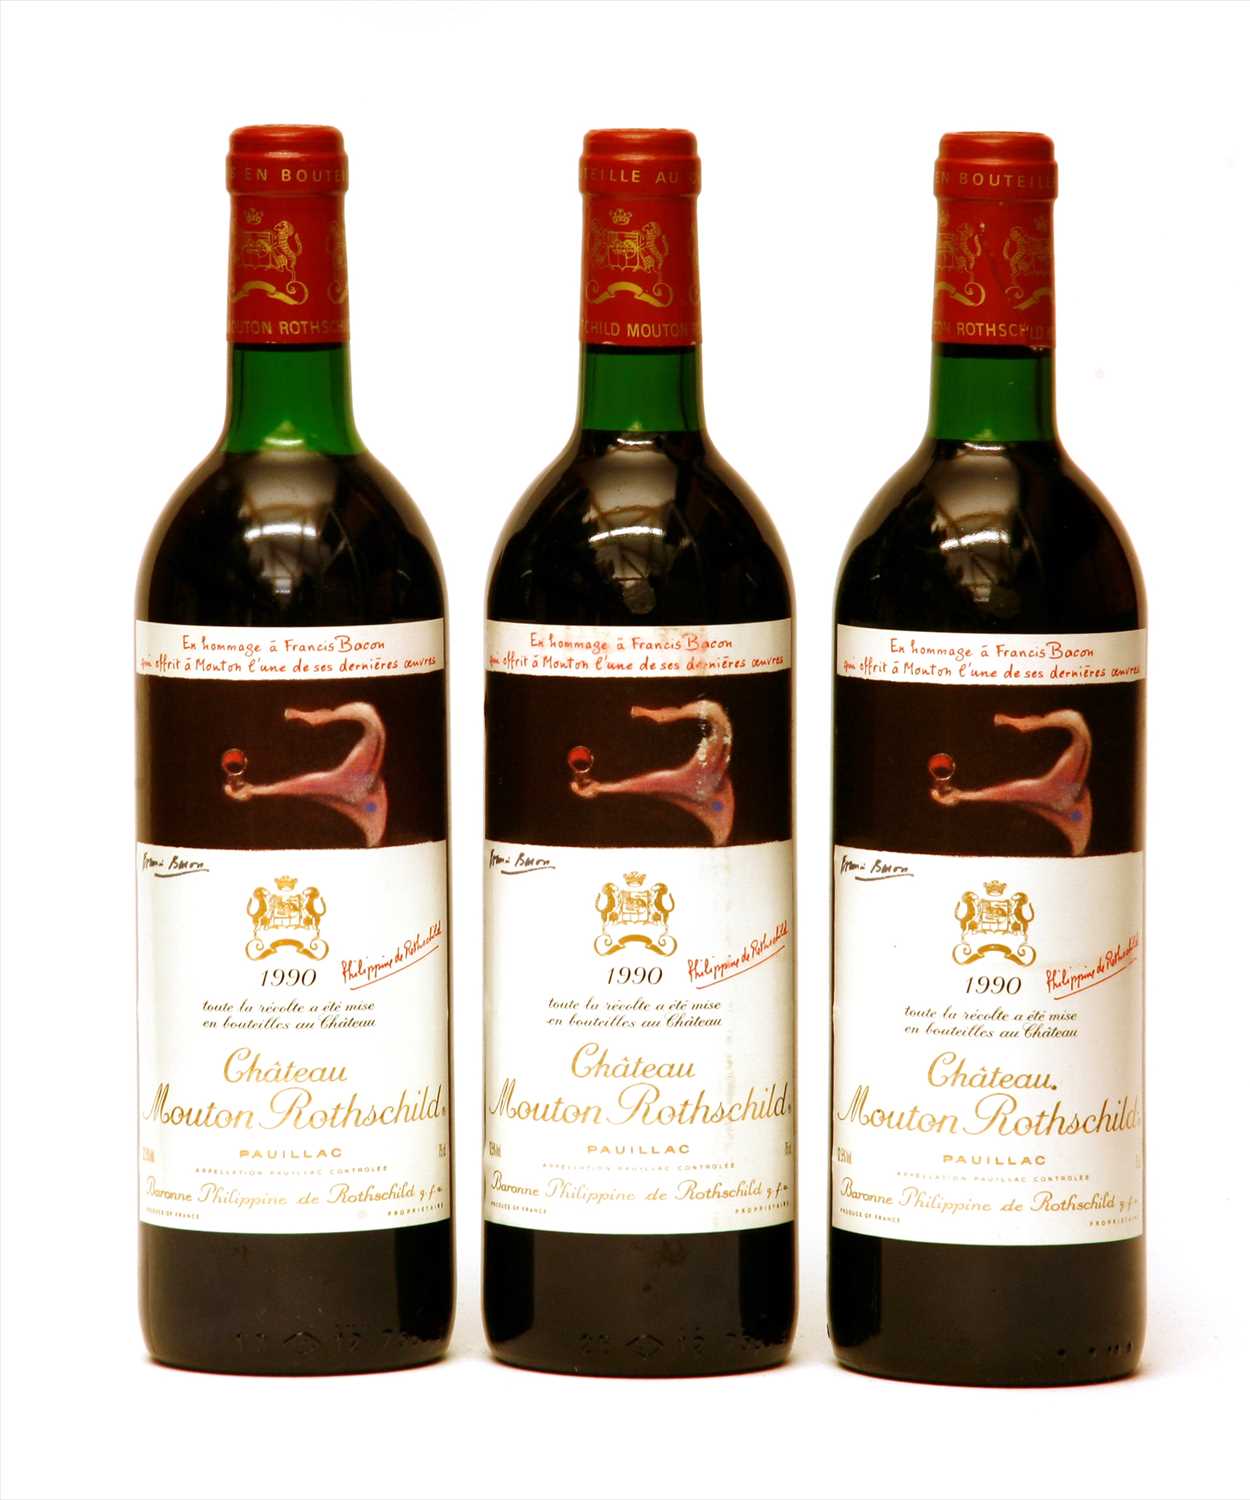 Lot 350 - Château Mouton Rothschild, Pauillac, 1st growth, 1990, three bottles (with Francis Bacon labels)